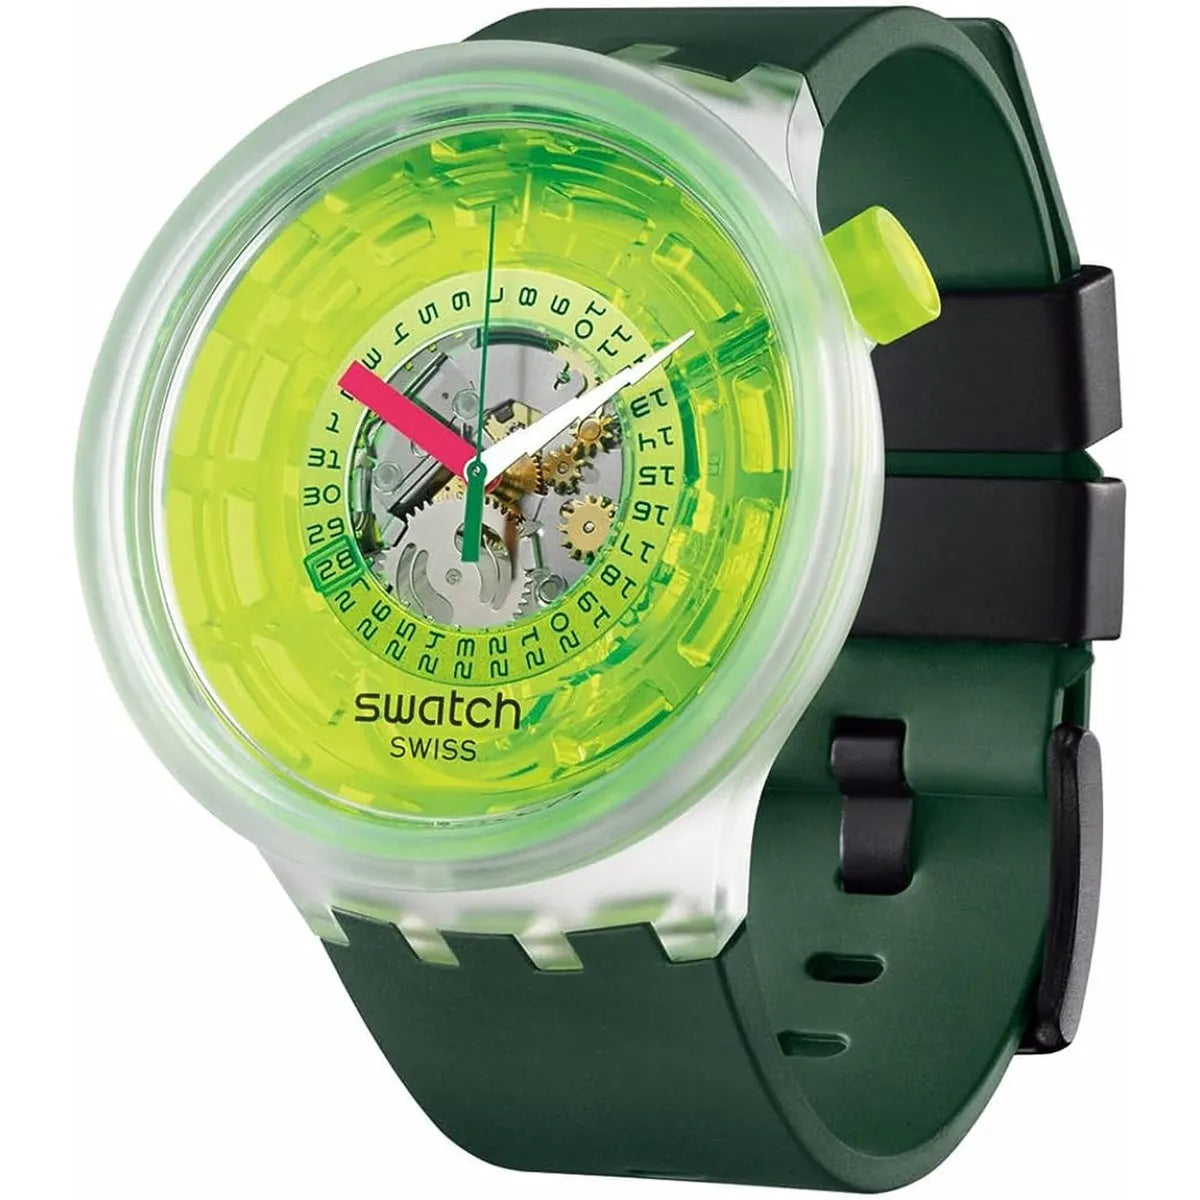 RELOJ SWATCH SB05K400 - SWATCH BLINDED BY NEON